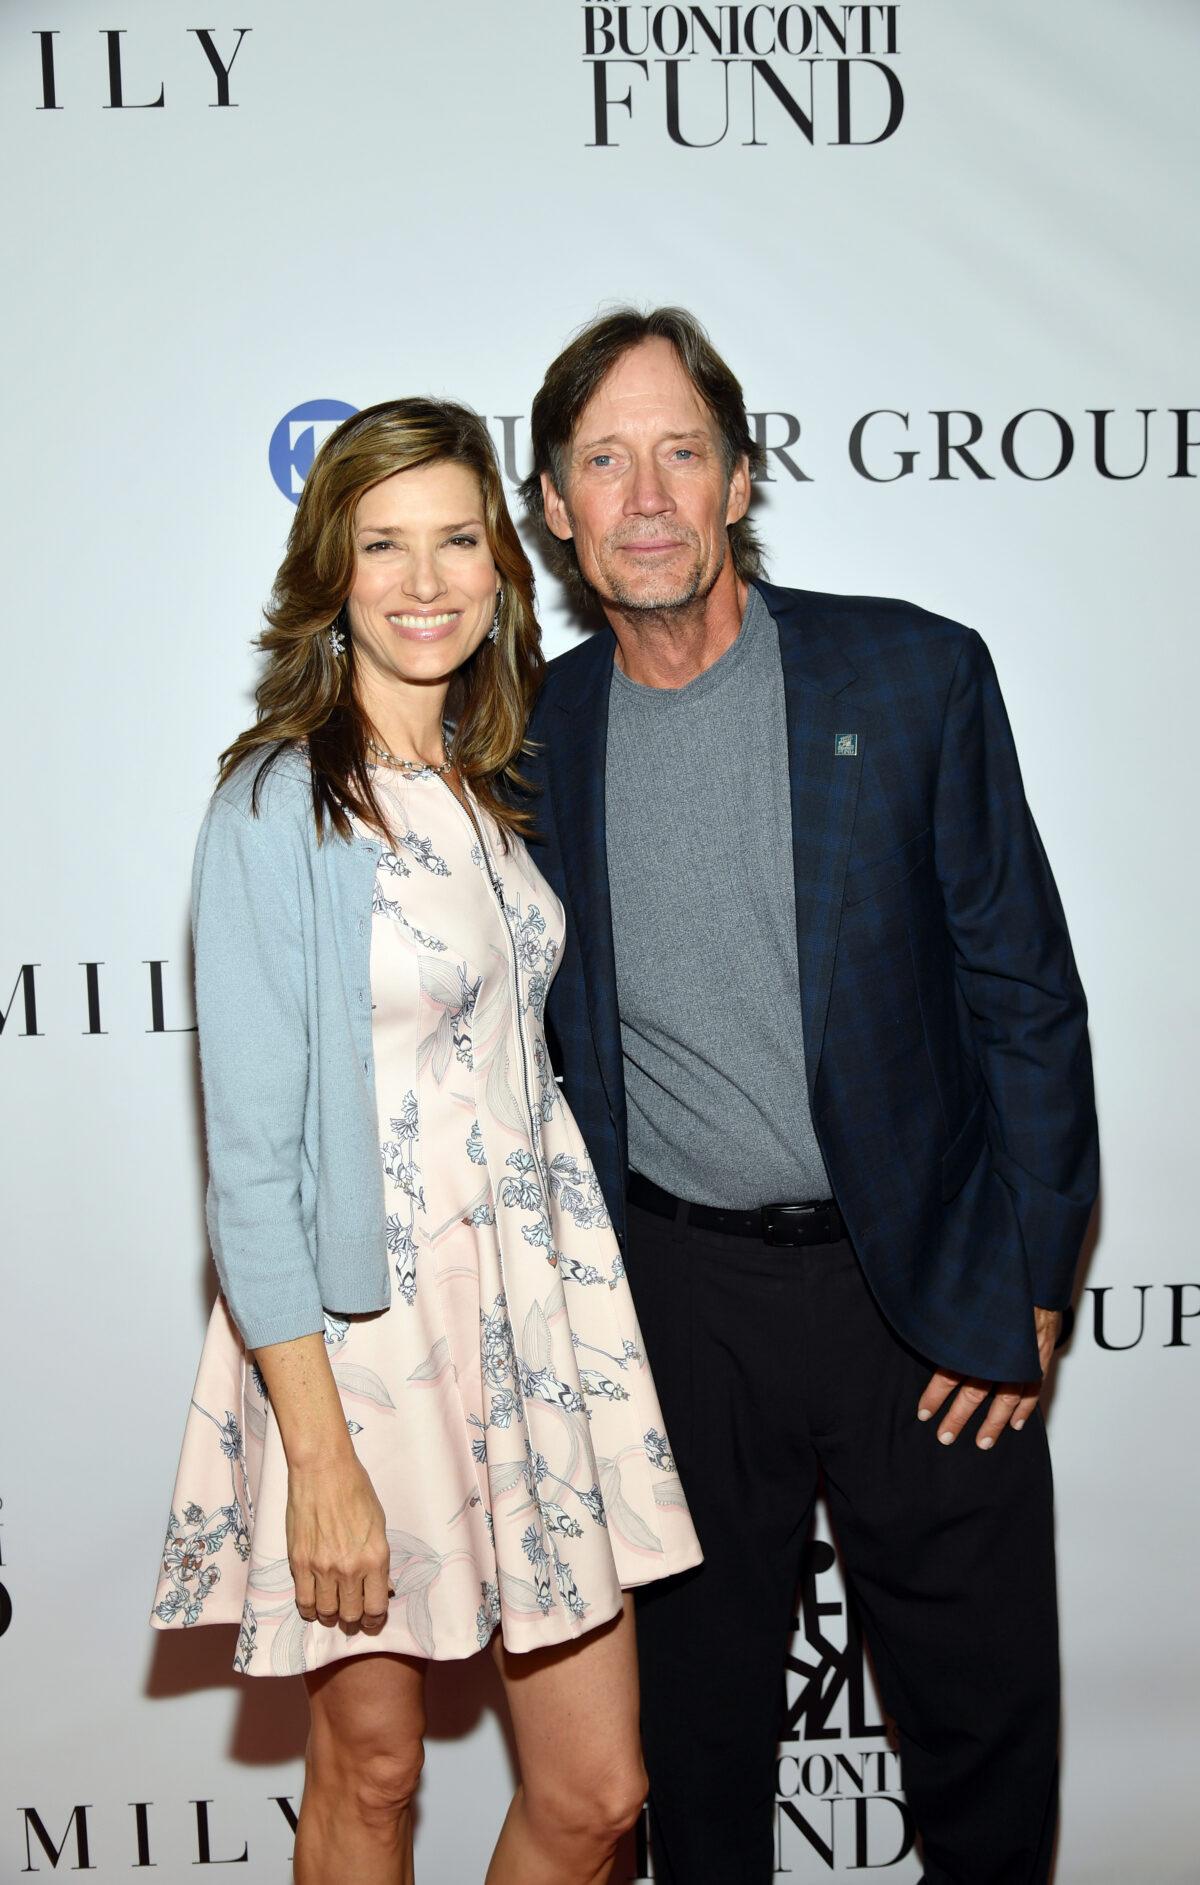 Sam Sorbo and Kevin Sorbo at the 34th annual Great Sports Legends Dinner, a benefit for the Buoniconti Fund to Cure Paralysis, in New York on Oct. 7, 2019. (Mike Coppola/Getty Images for The Buoniconti Fund To Cure Paralysis )